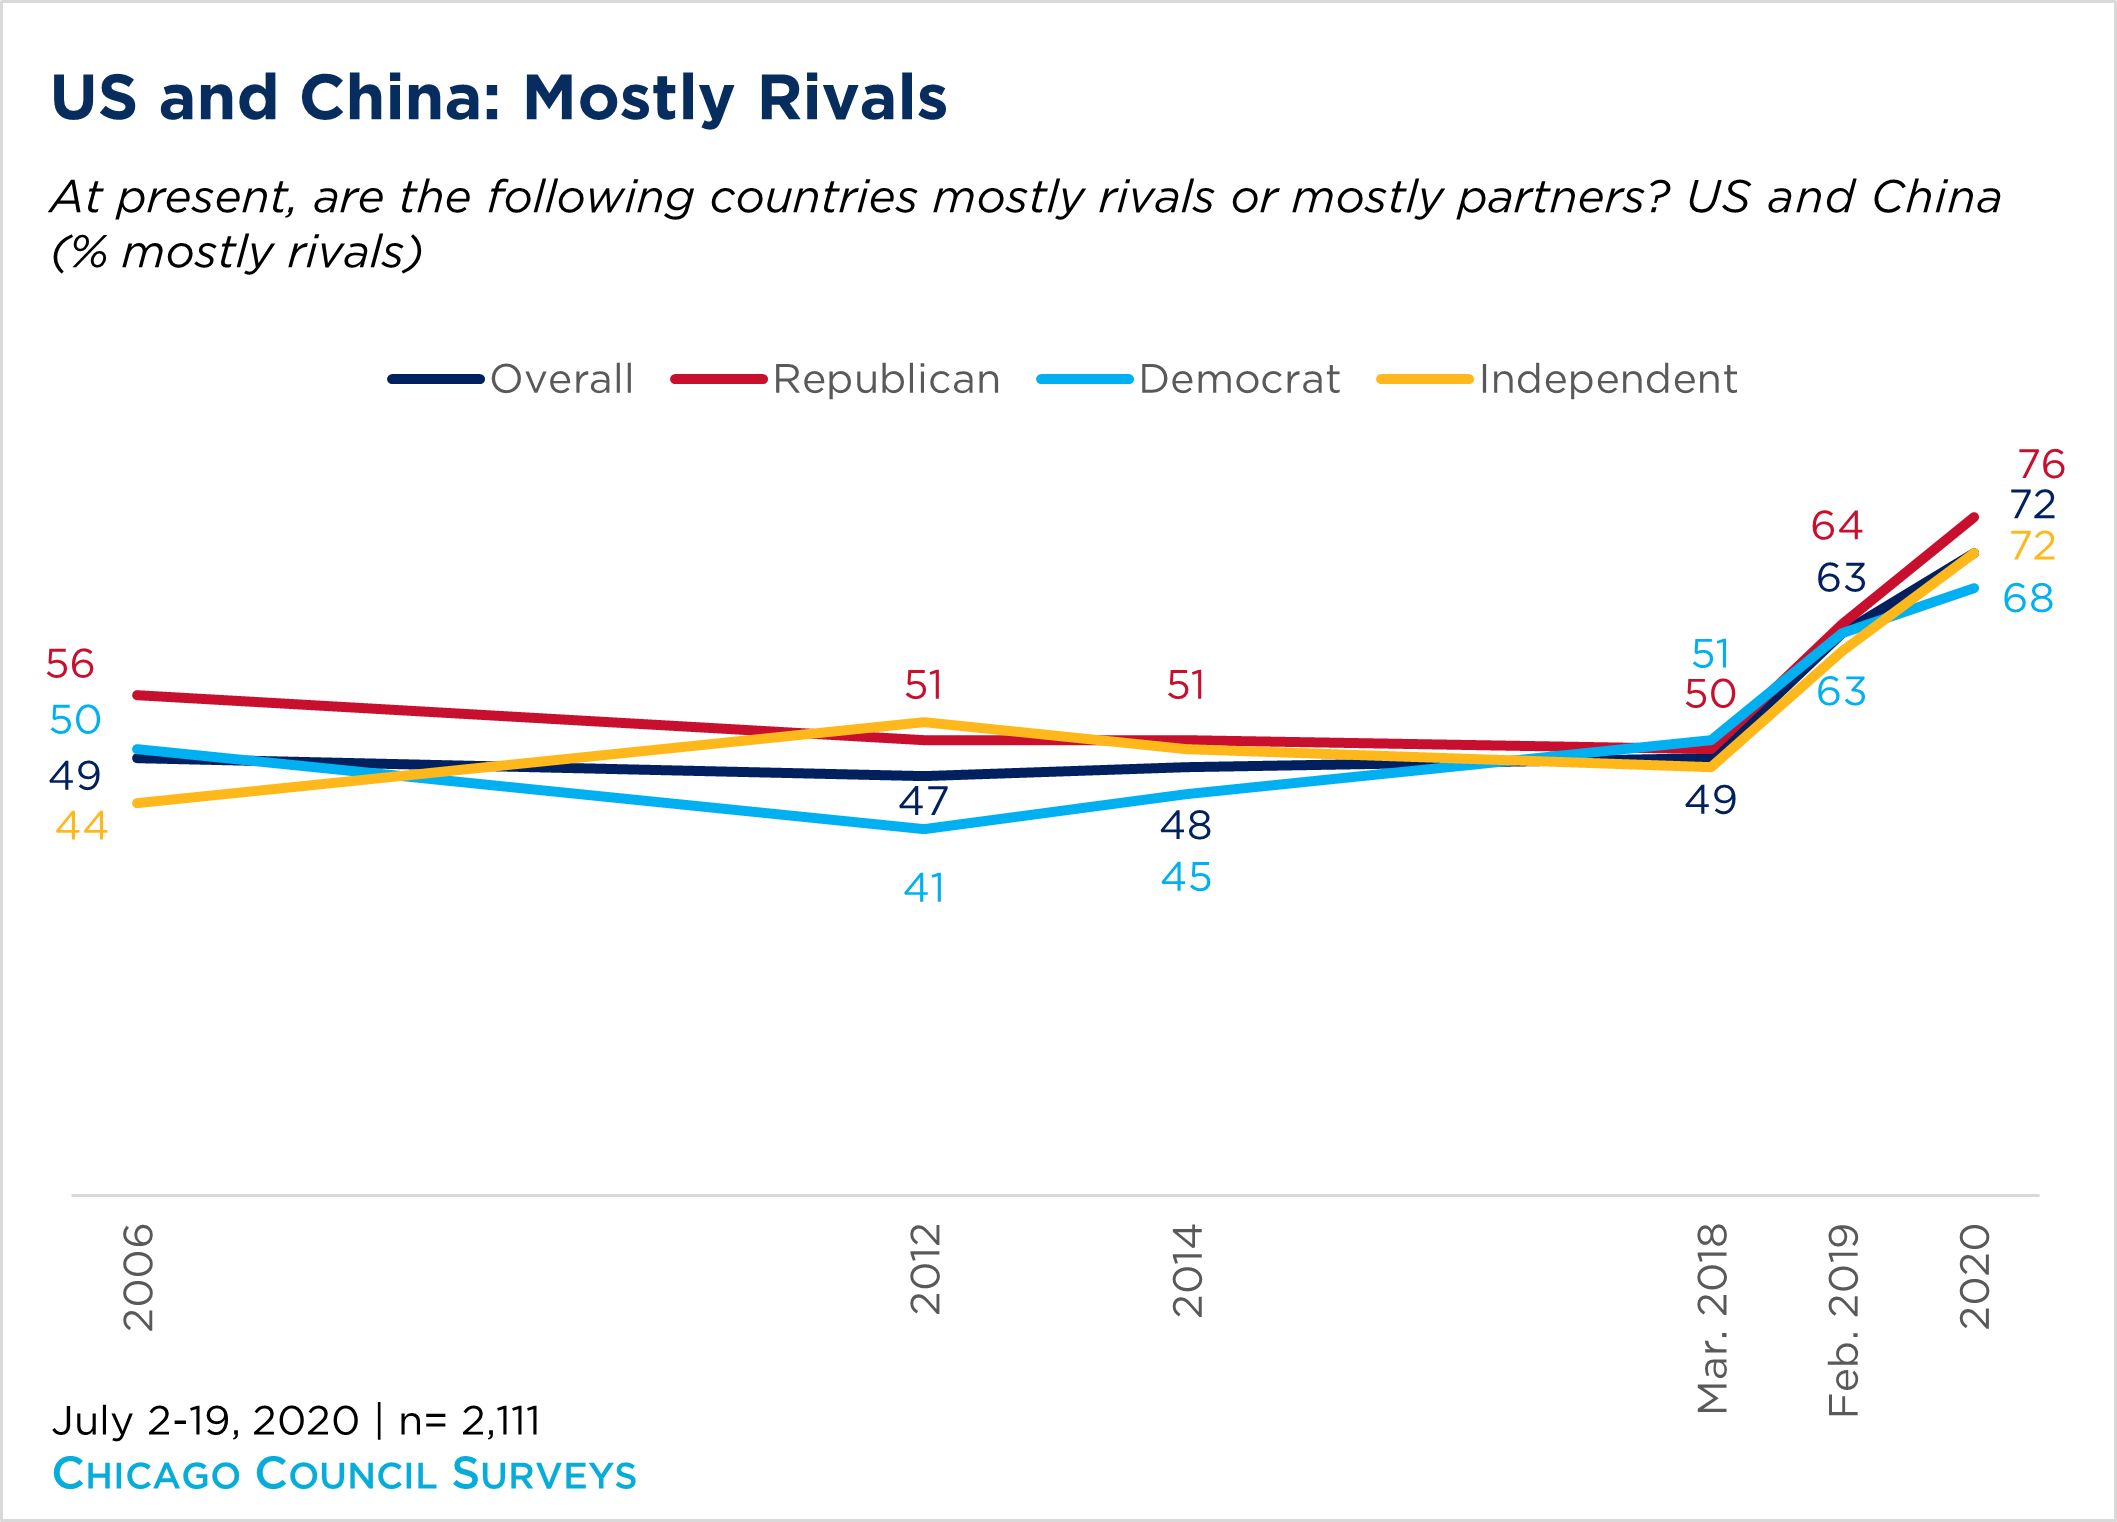 Chart showing how Americans feel about China as mostly a rival